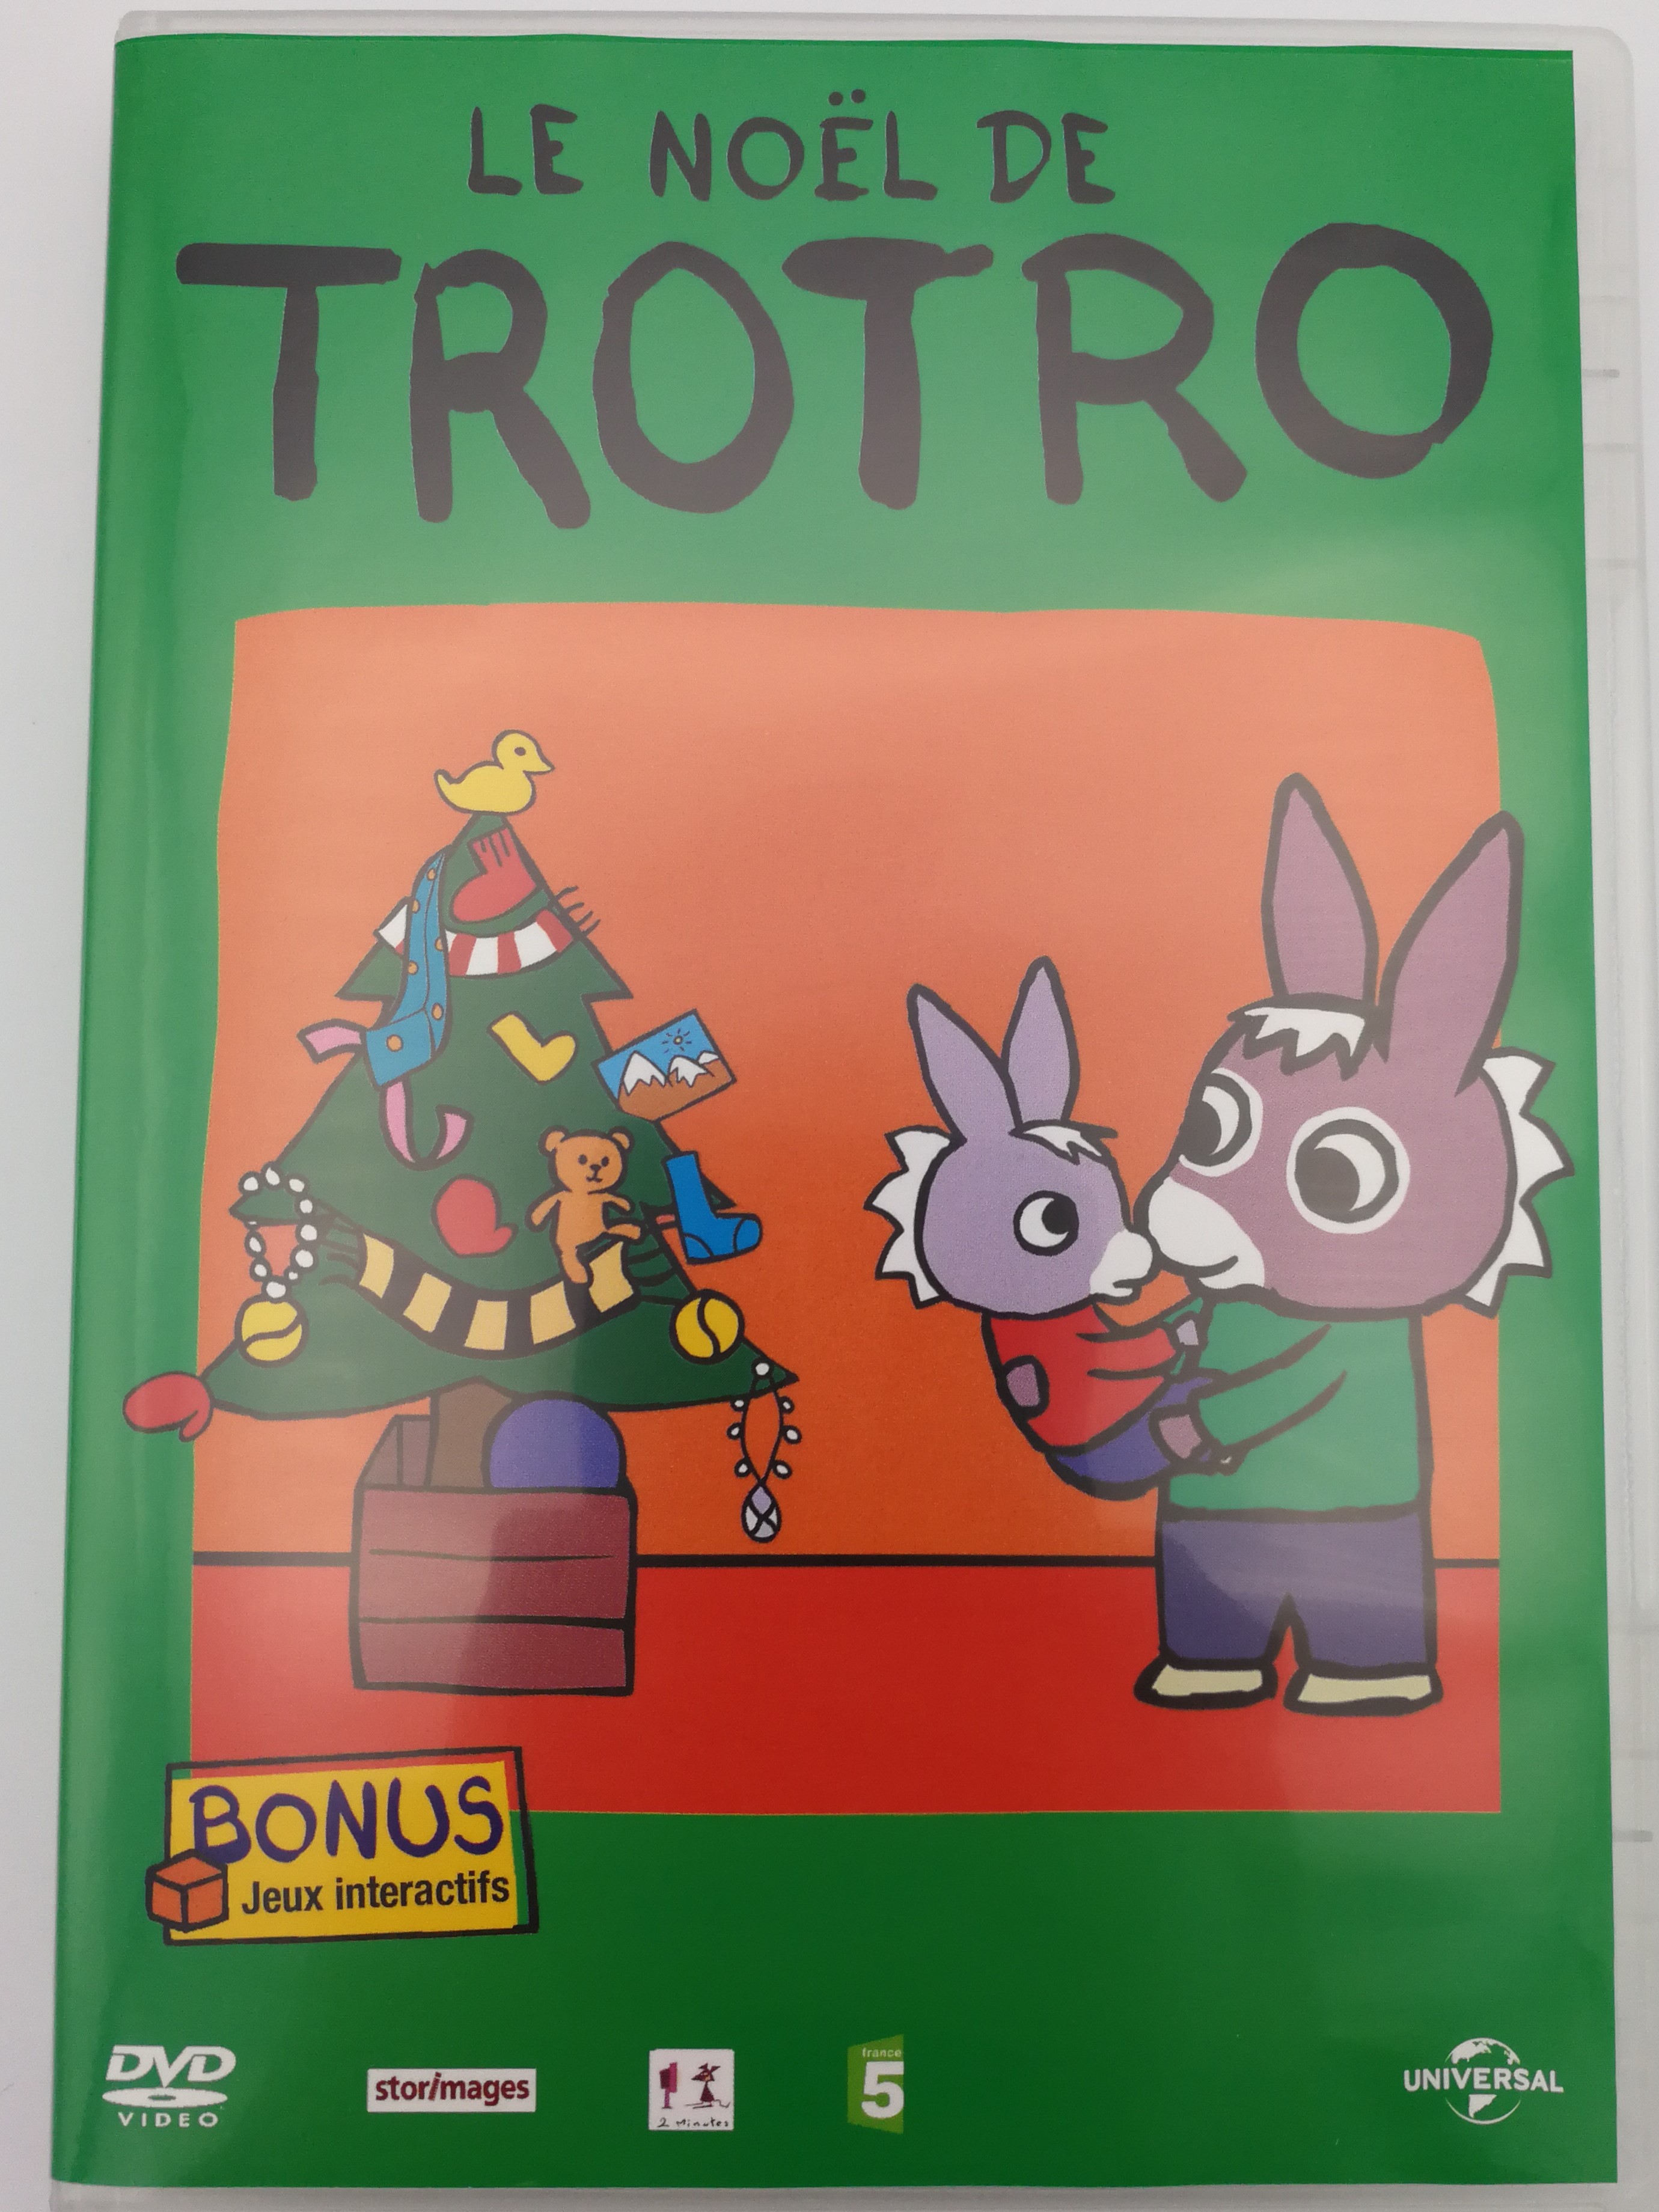 Le Noel de Trotro DVD 2004 / Bonus: Interacive Games - Jeux Interactifs /  Directed by Eric Cazes, Stephane Lezoray / French animated tv show / 13  episodes - Bible in My Language